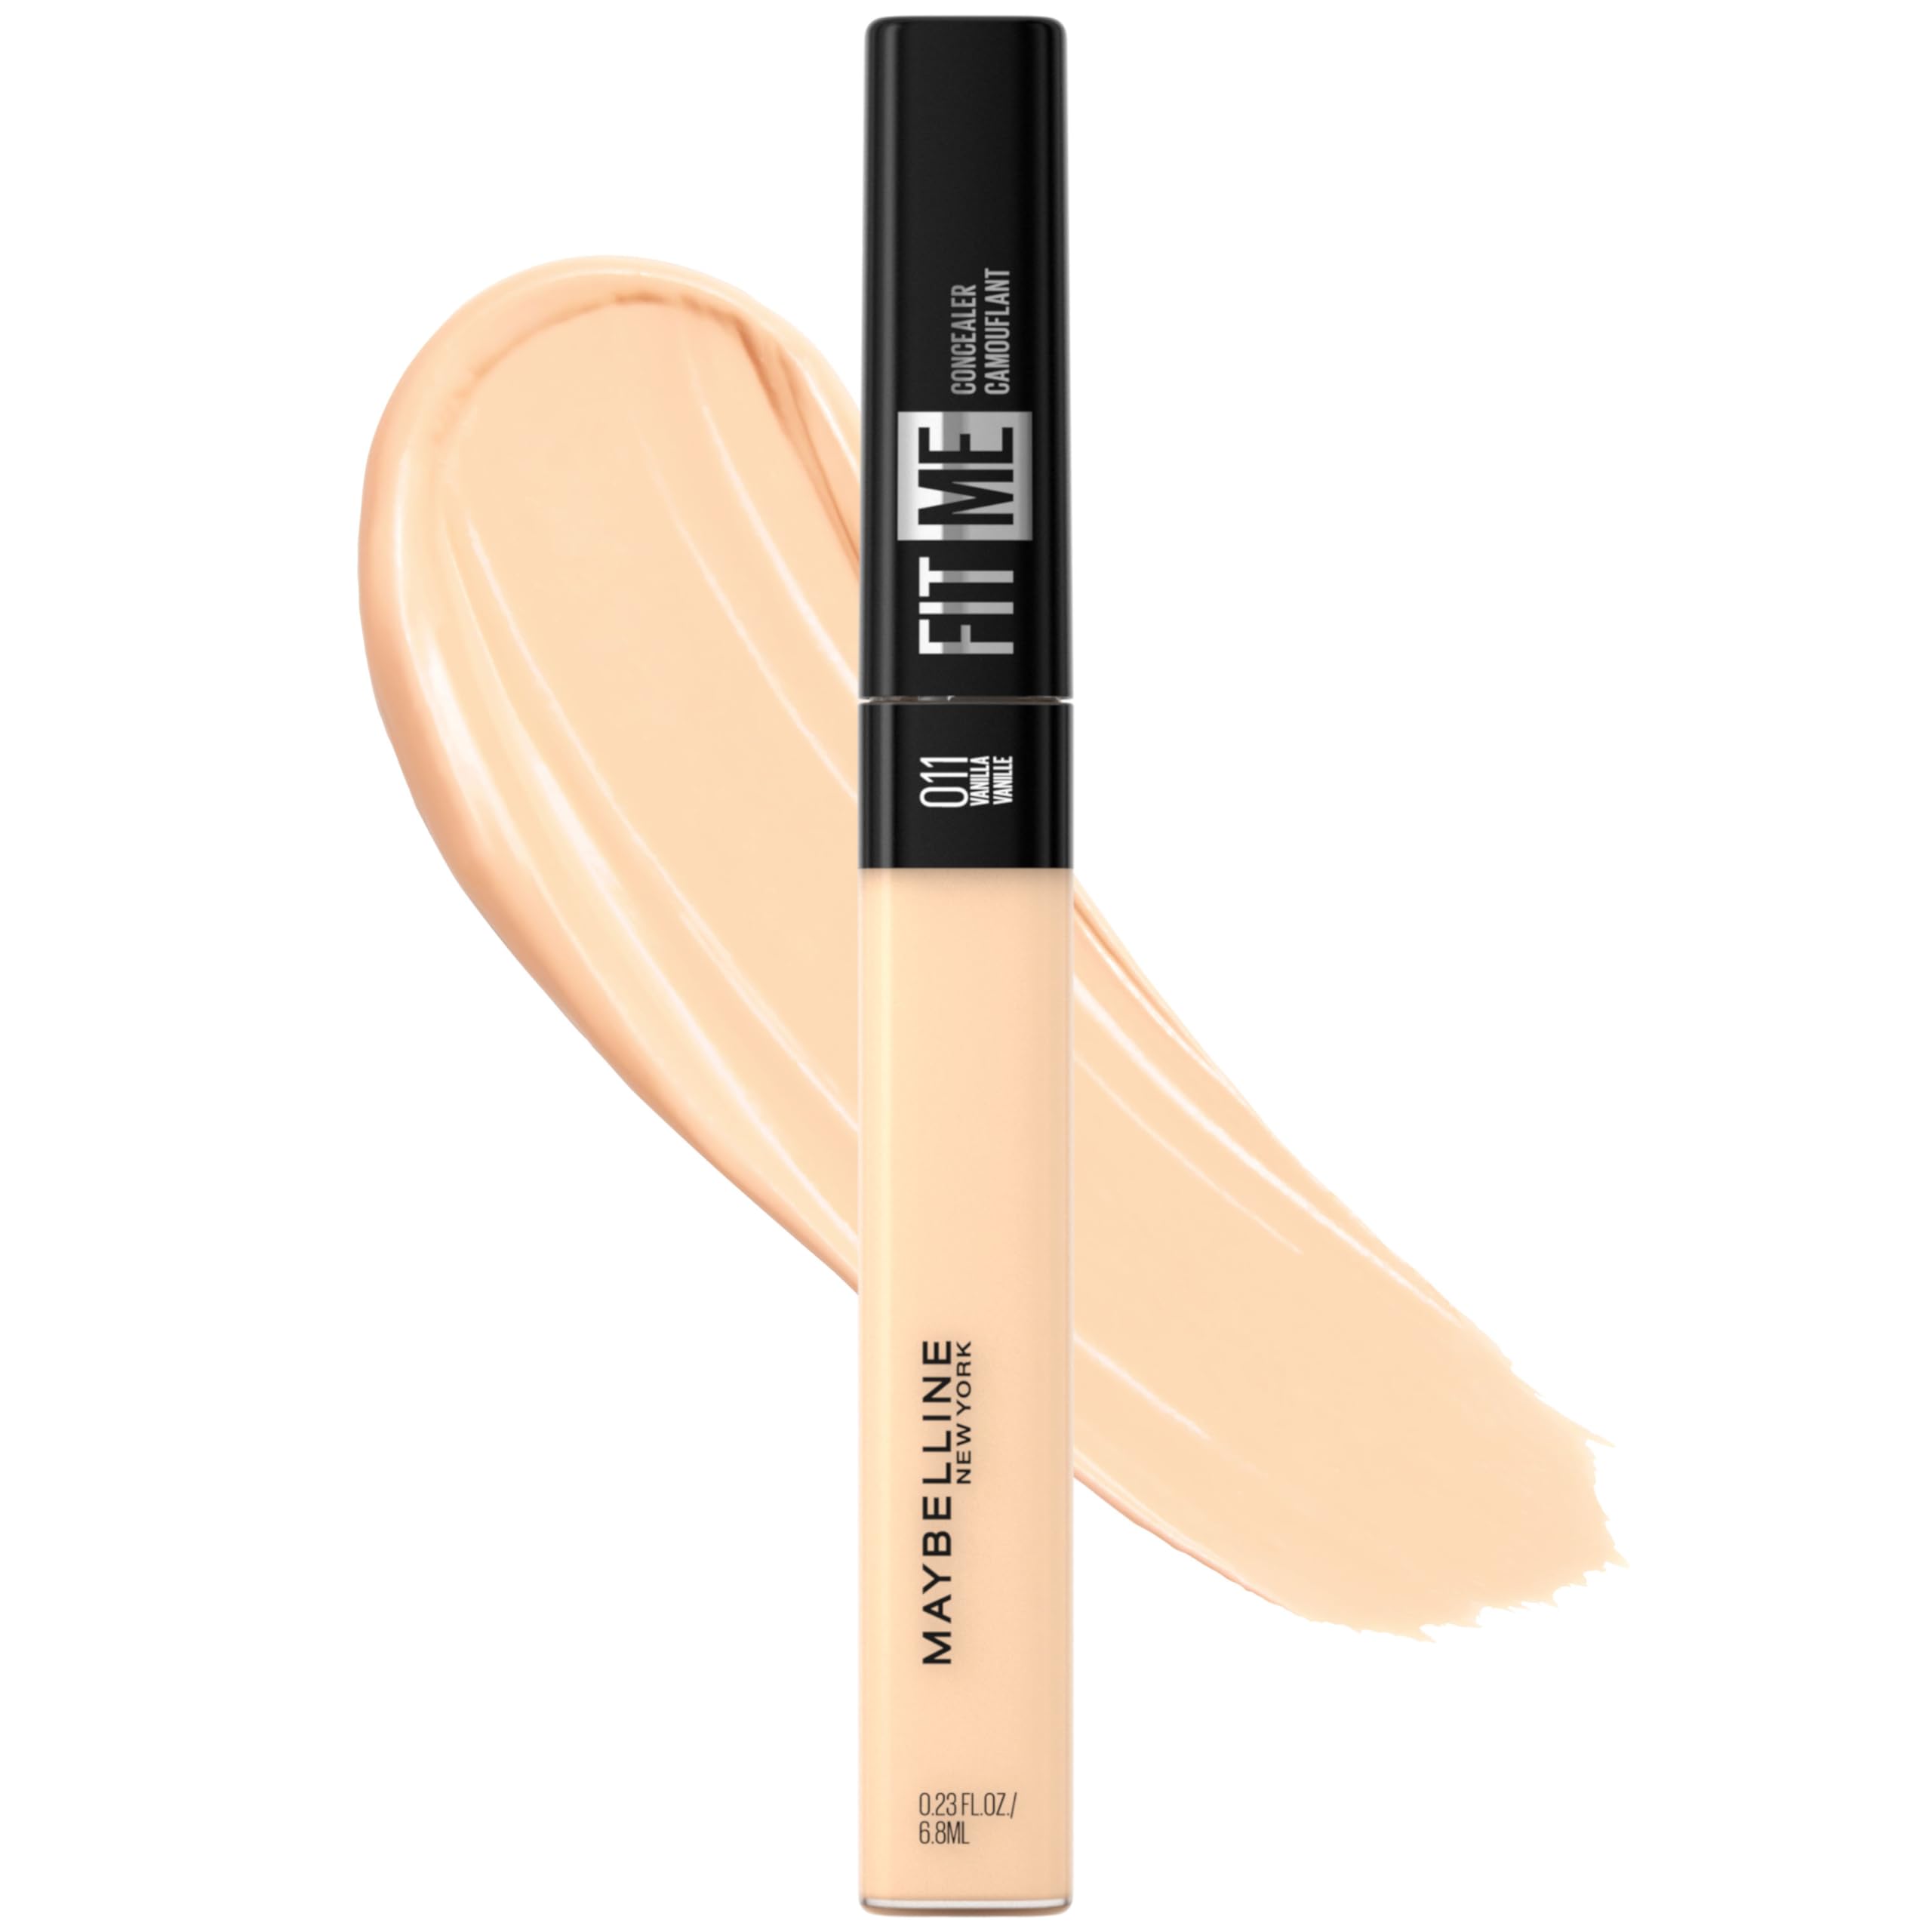 Maybelline Fit Me Liquid Concealer Makeup, Natural Coverage, Lightweight, Conceals, Covers Oil-Free, Vanilla (Packaging May Vary) - image 1 of 3